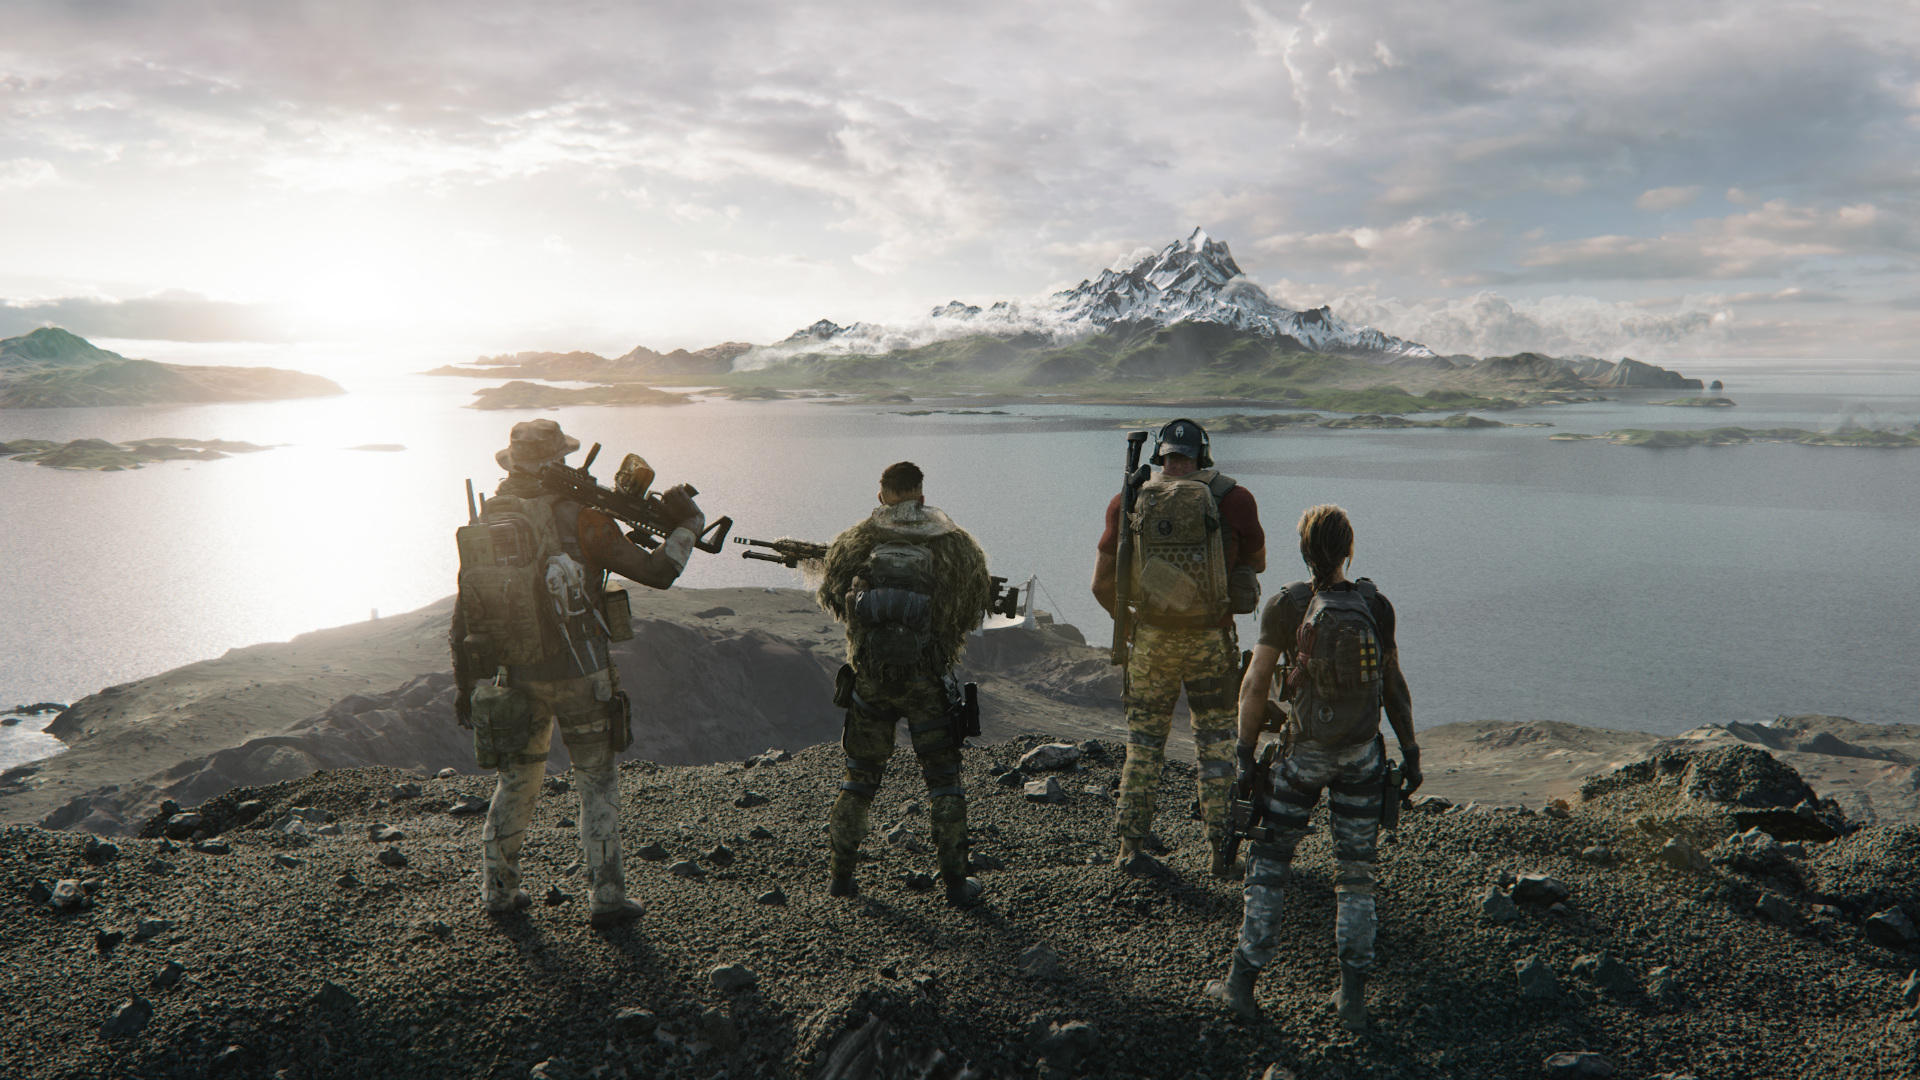 ghost-recon-breakpoint-players-are-doing-actual-recon-on-the-upcoming-raids-island